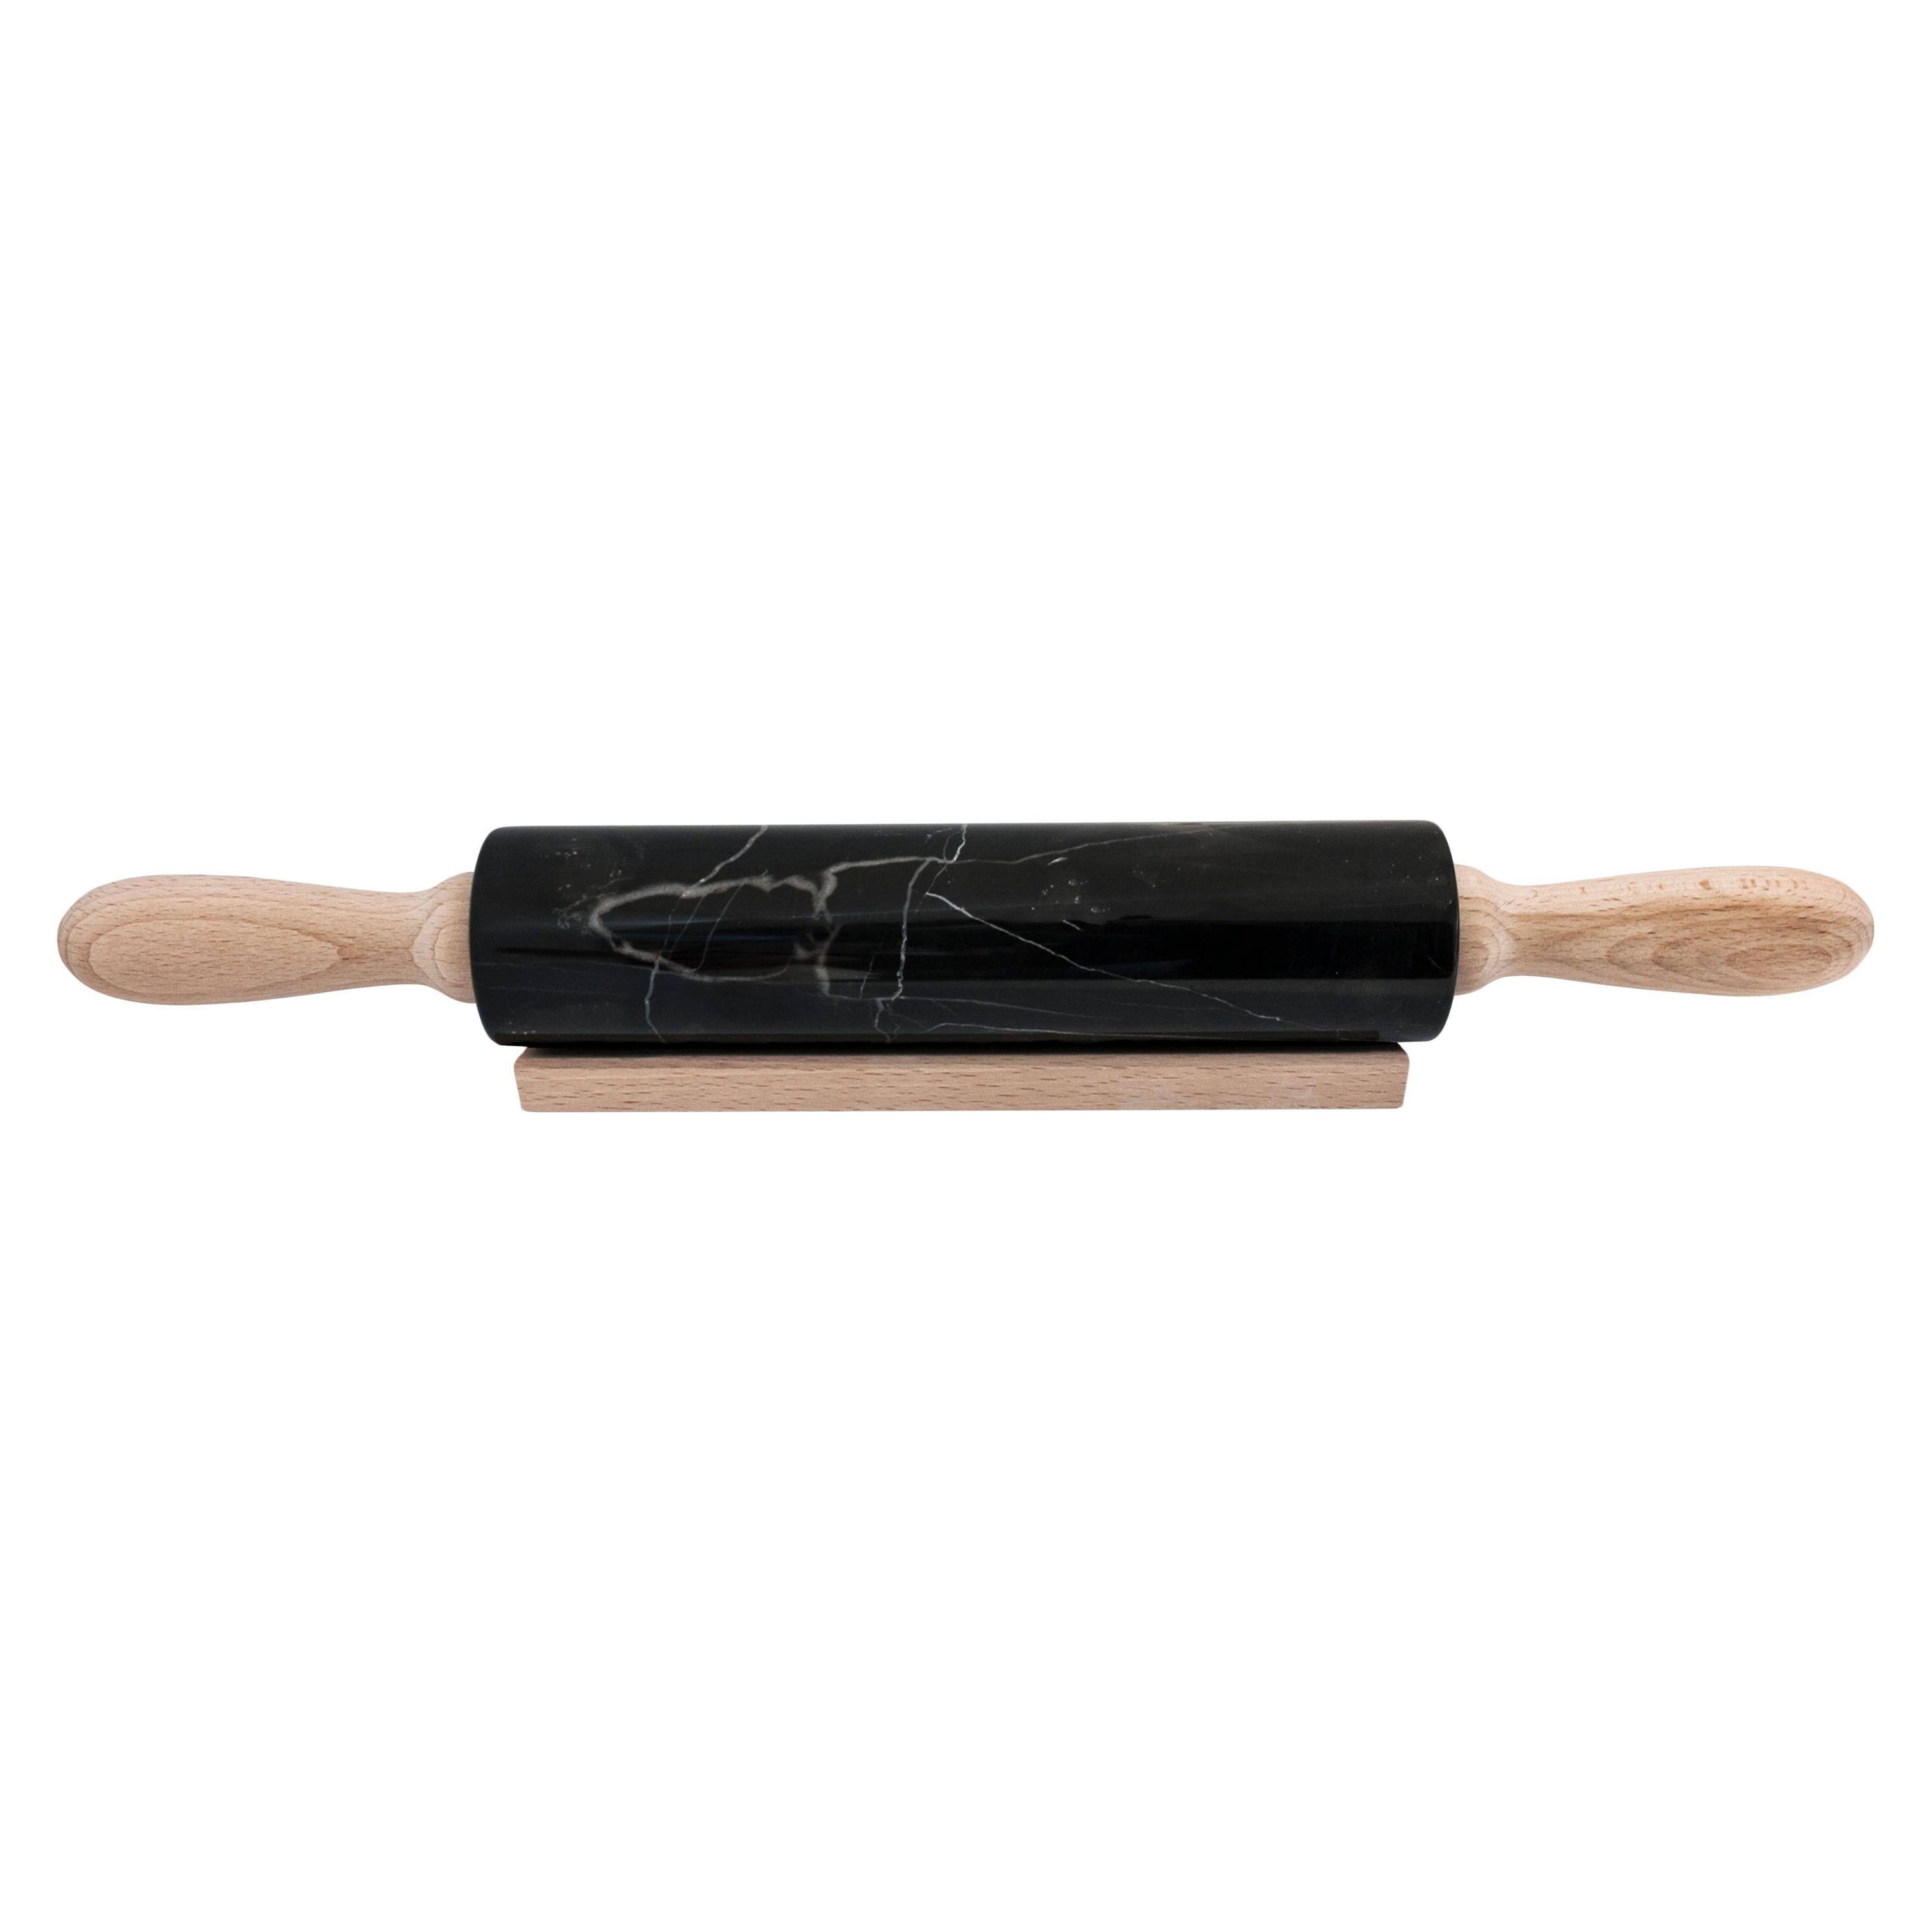 Black Marquina marble rolling pin with wooden handles. It is assembled manually. Each piece is in a way unique (every marble block is different in veins and shades) and handmade by Italian artisans specialized over generations in processing marble.